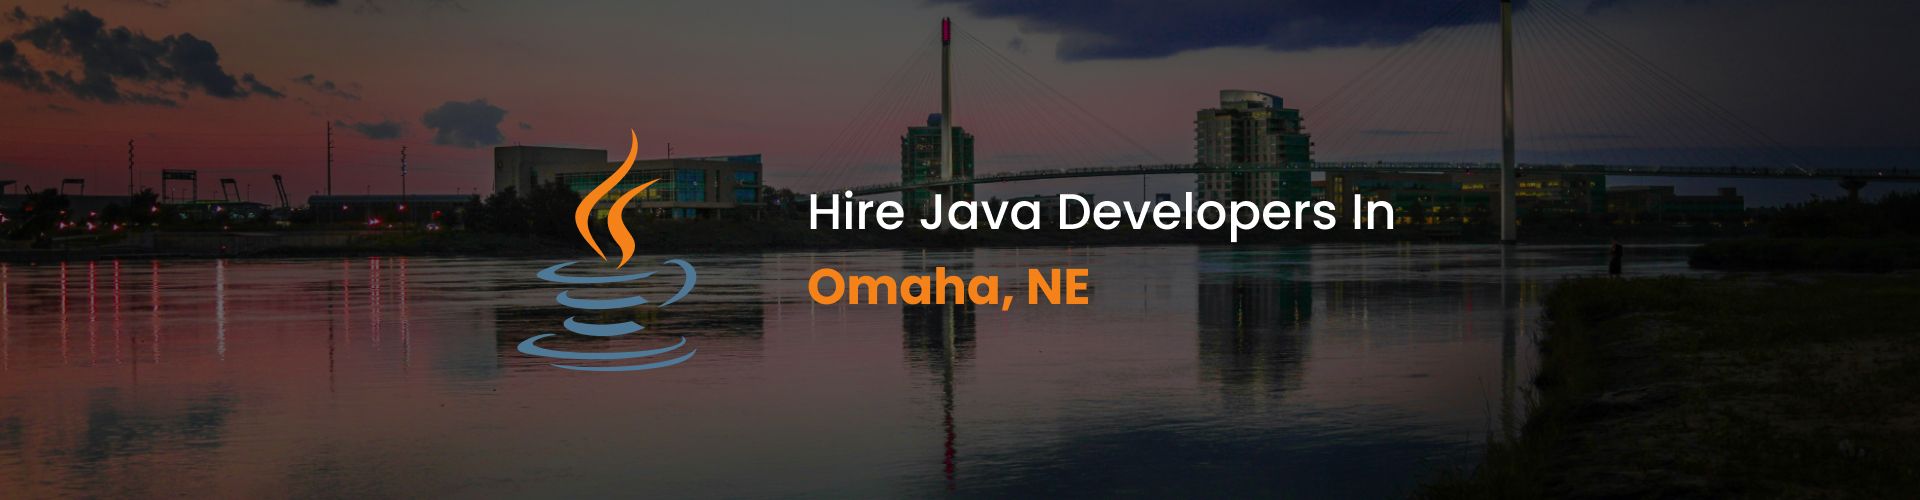 hire java developers in omaha